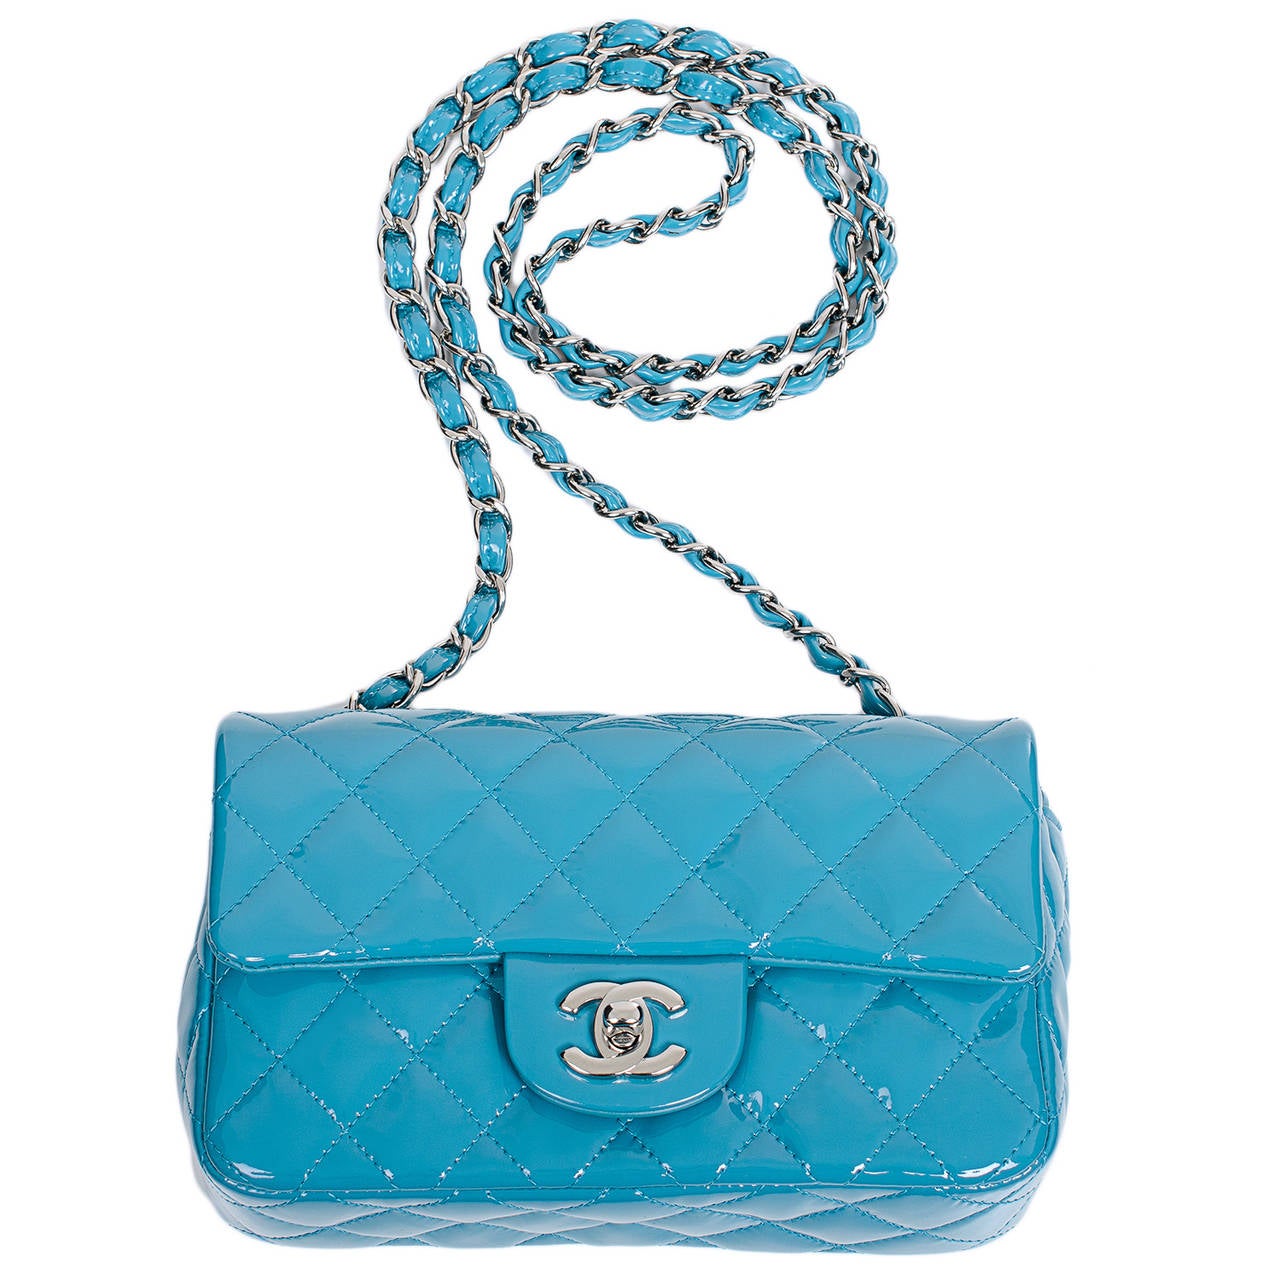 Women's Chanel Turquoise Quilted Patent Small Classic Flap Bag